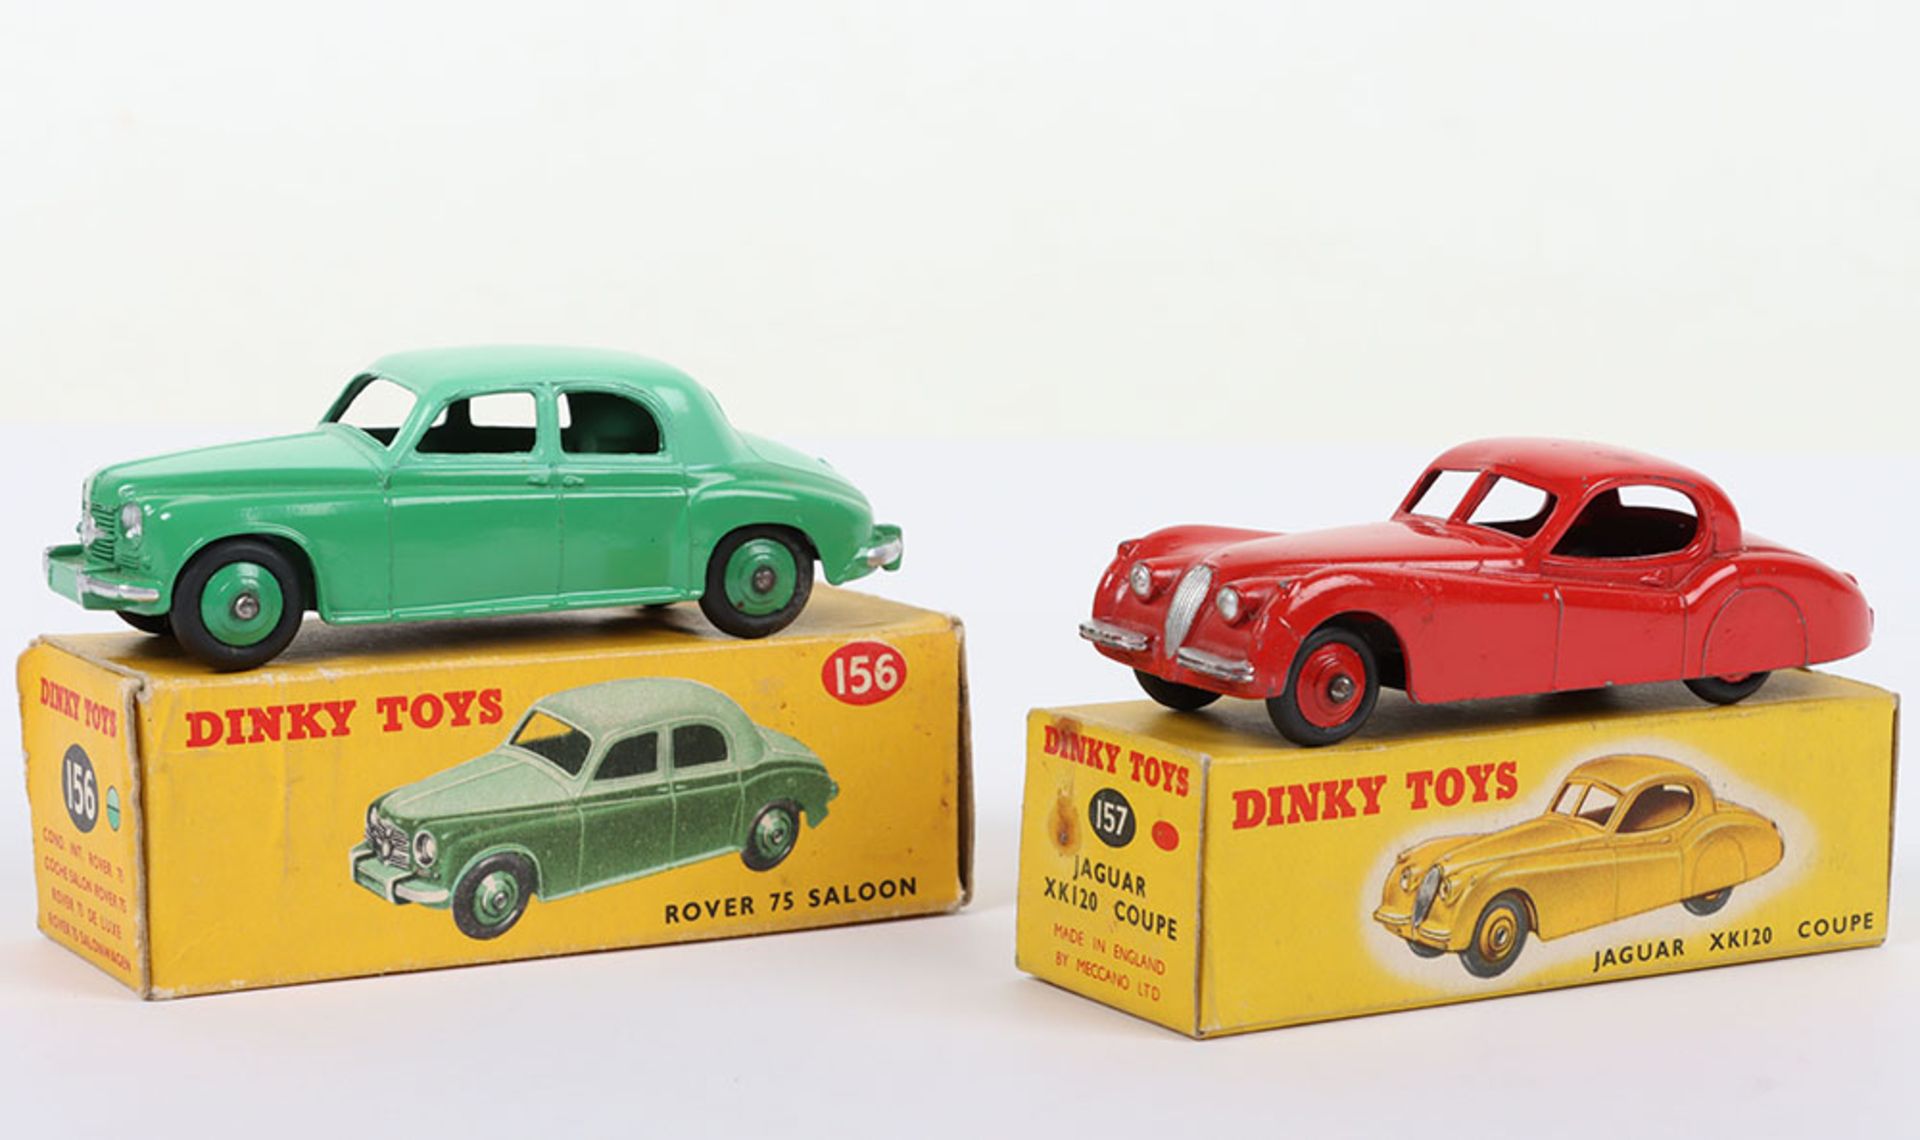 Two Dinky Toys boxed Cars